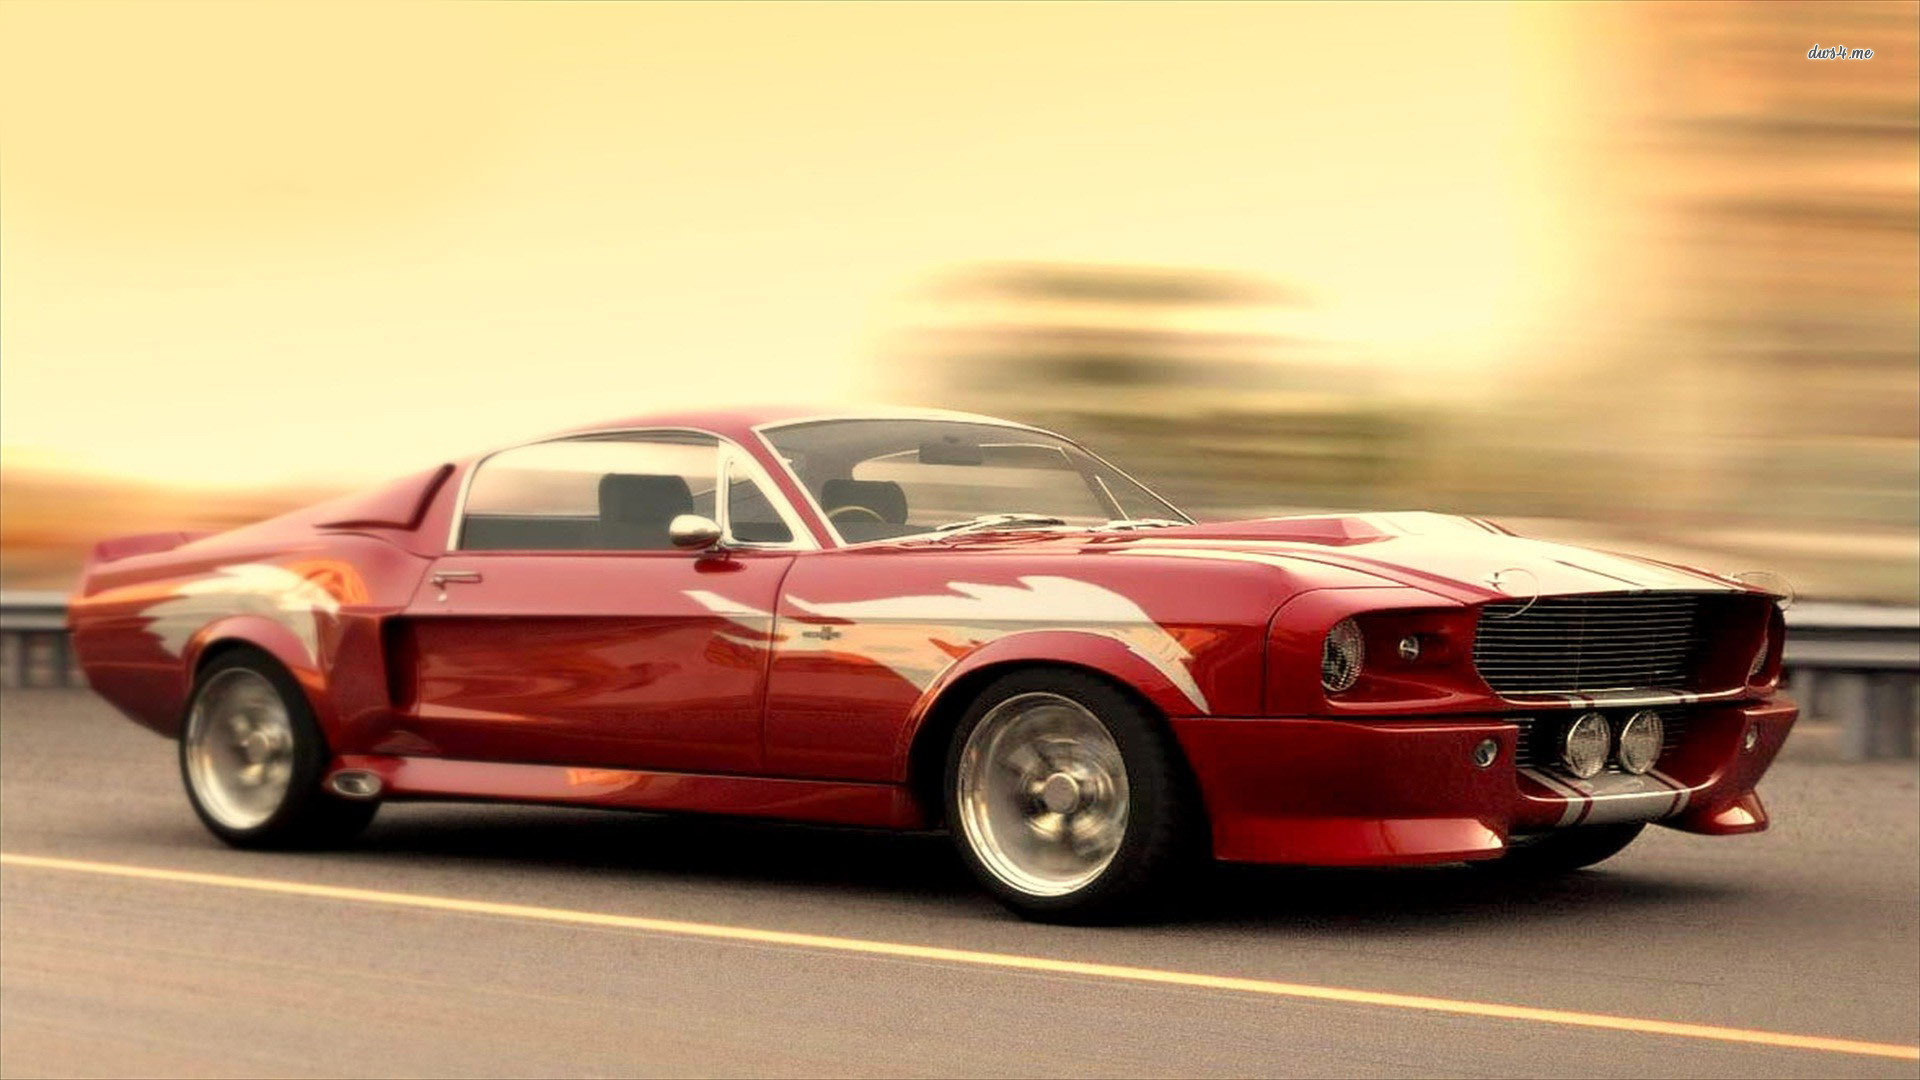 Ford Mustang Shelby GT 500 wallpaper - Car wallpapers - #10641